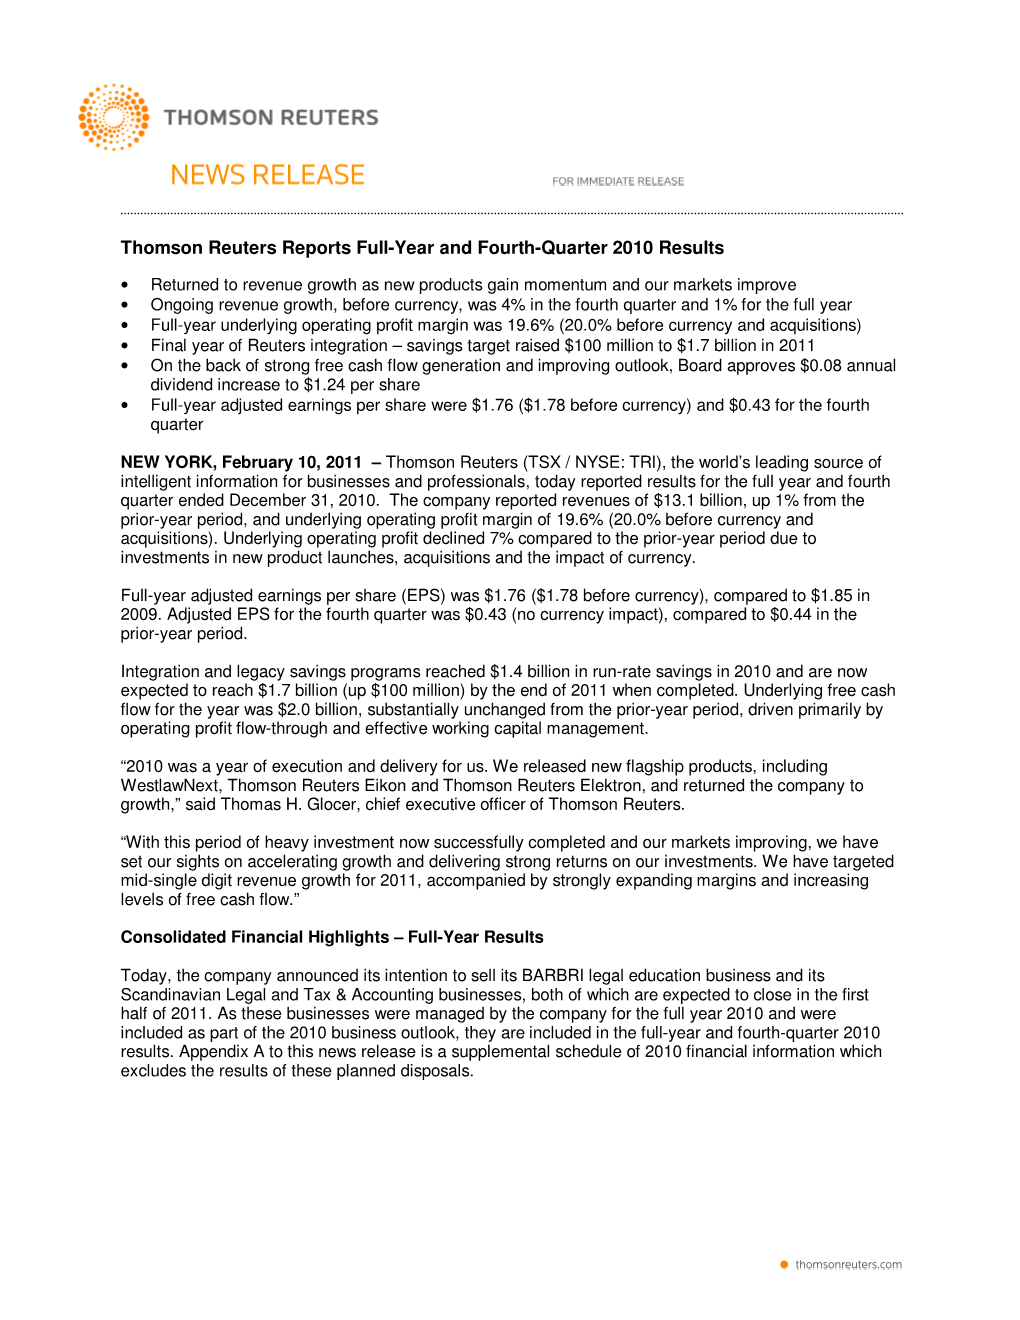 Thomson Reuters Reports Full-Year and Fourth-Quarter 2010 Results